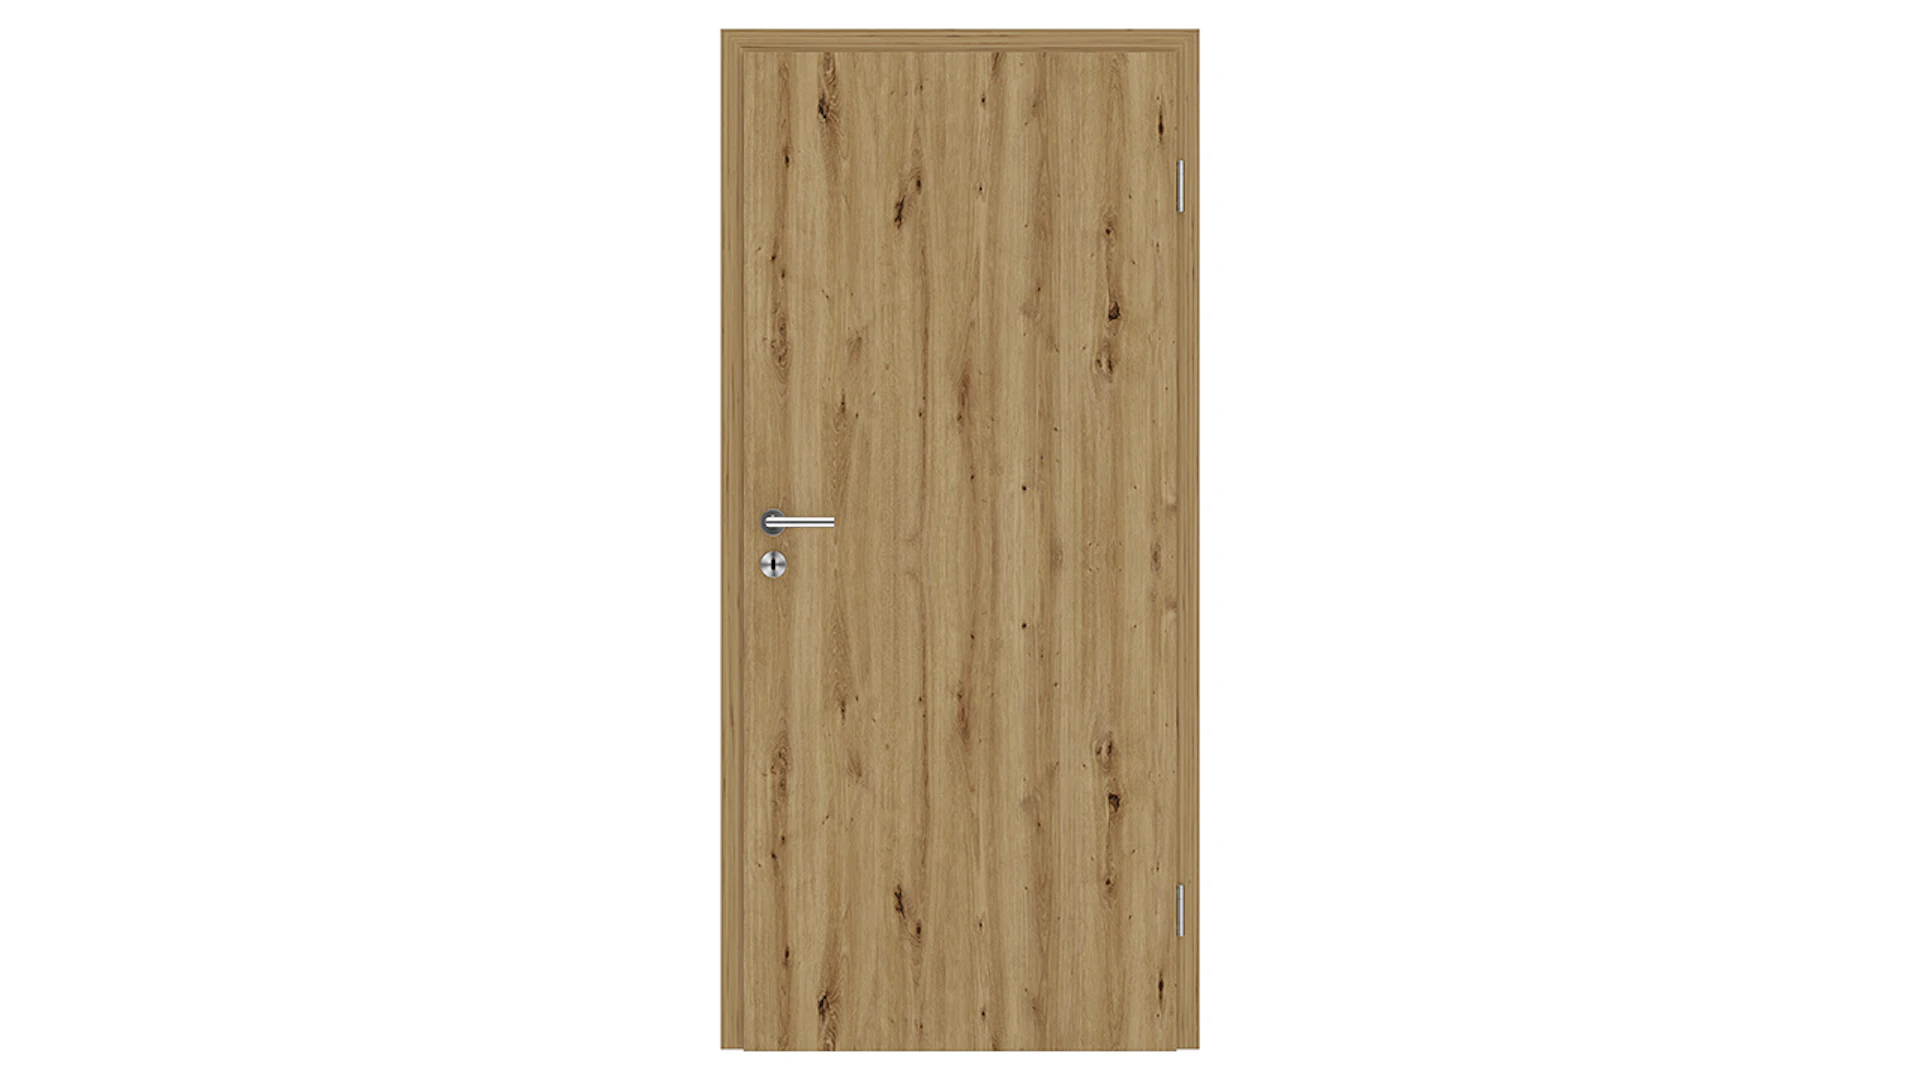 planeo CPL interior door CPL 1.0 - Tamme knot oak 2110 x 735 mm DIN R - round RSP hinge 2-t